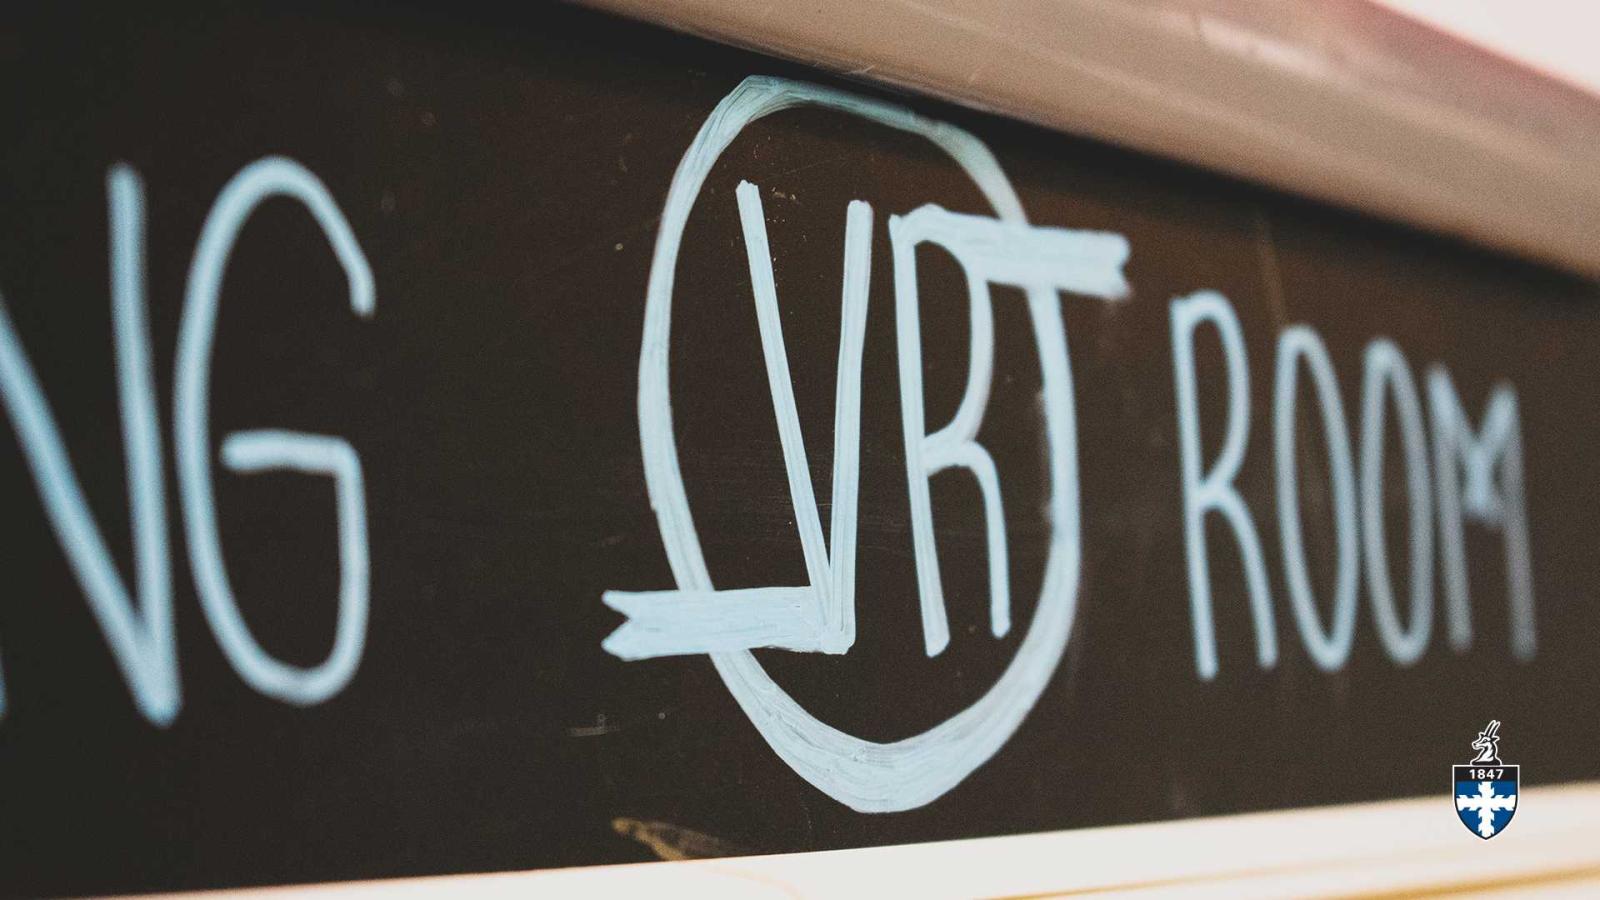 Chalk writing with text that says, "VR Room."